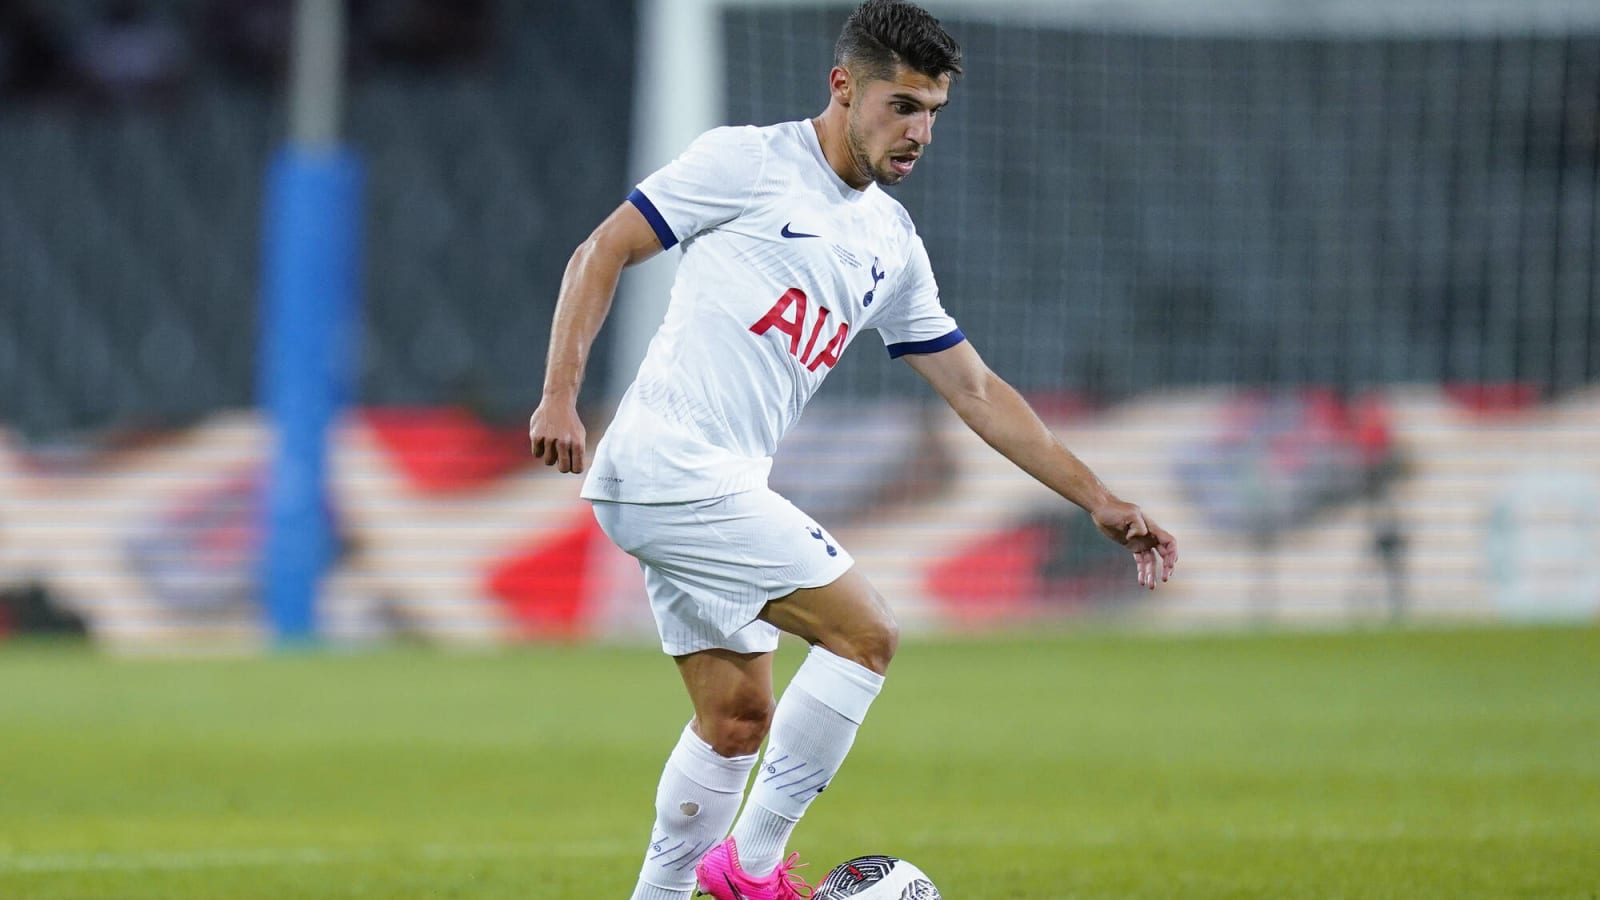 Tottenham attacker out for months following training injury